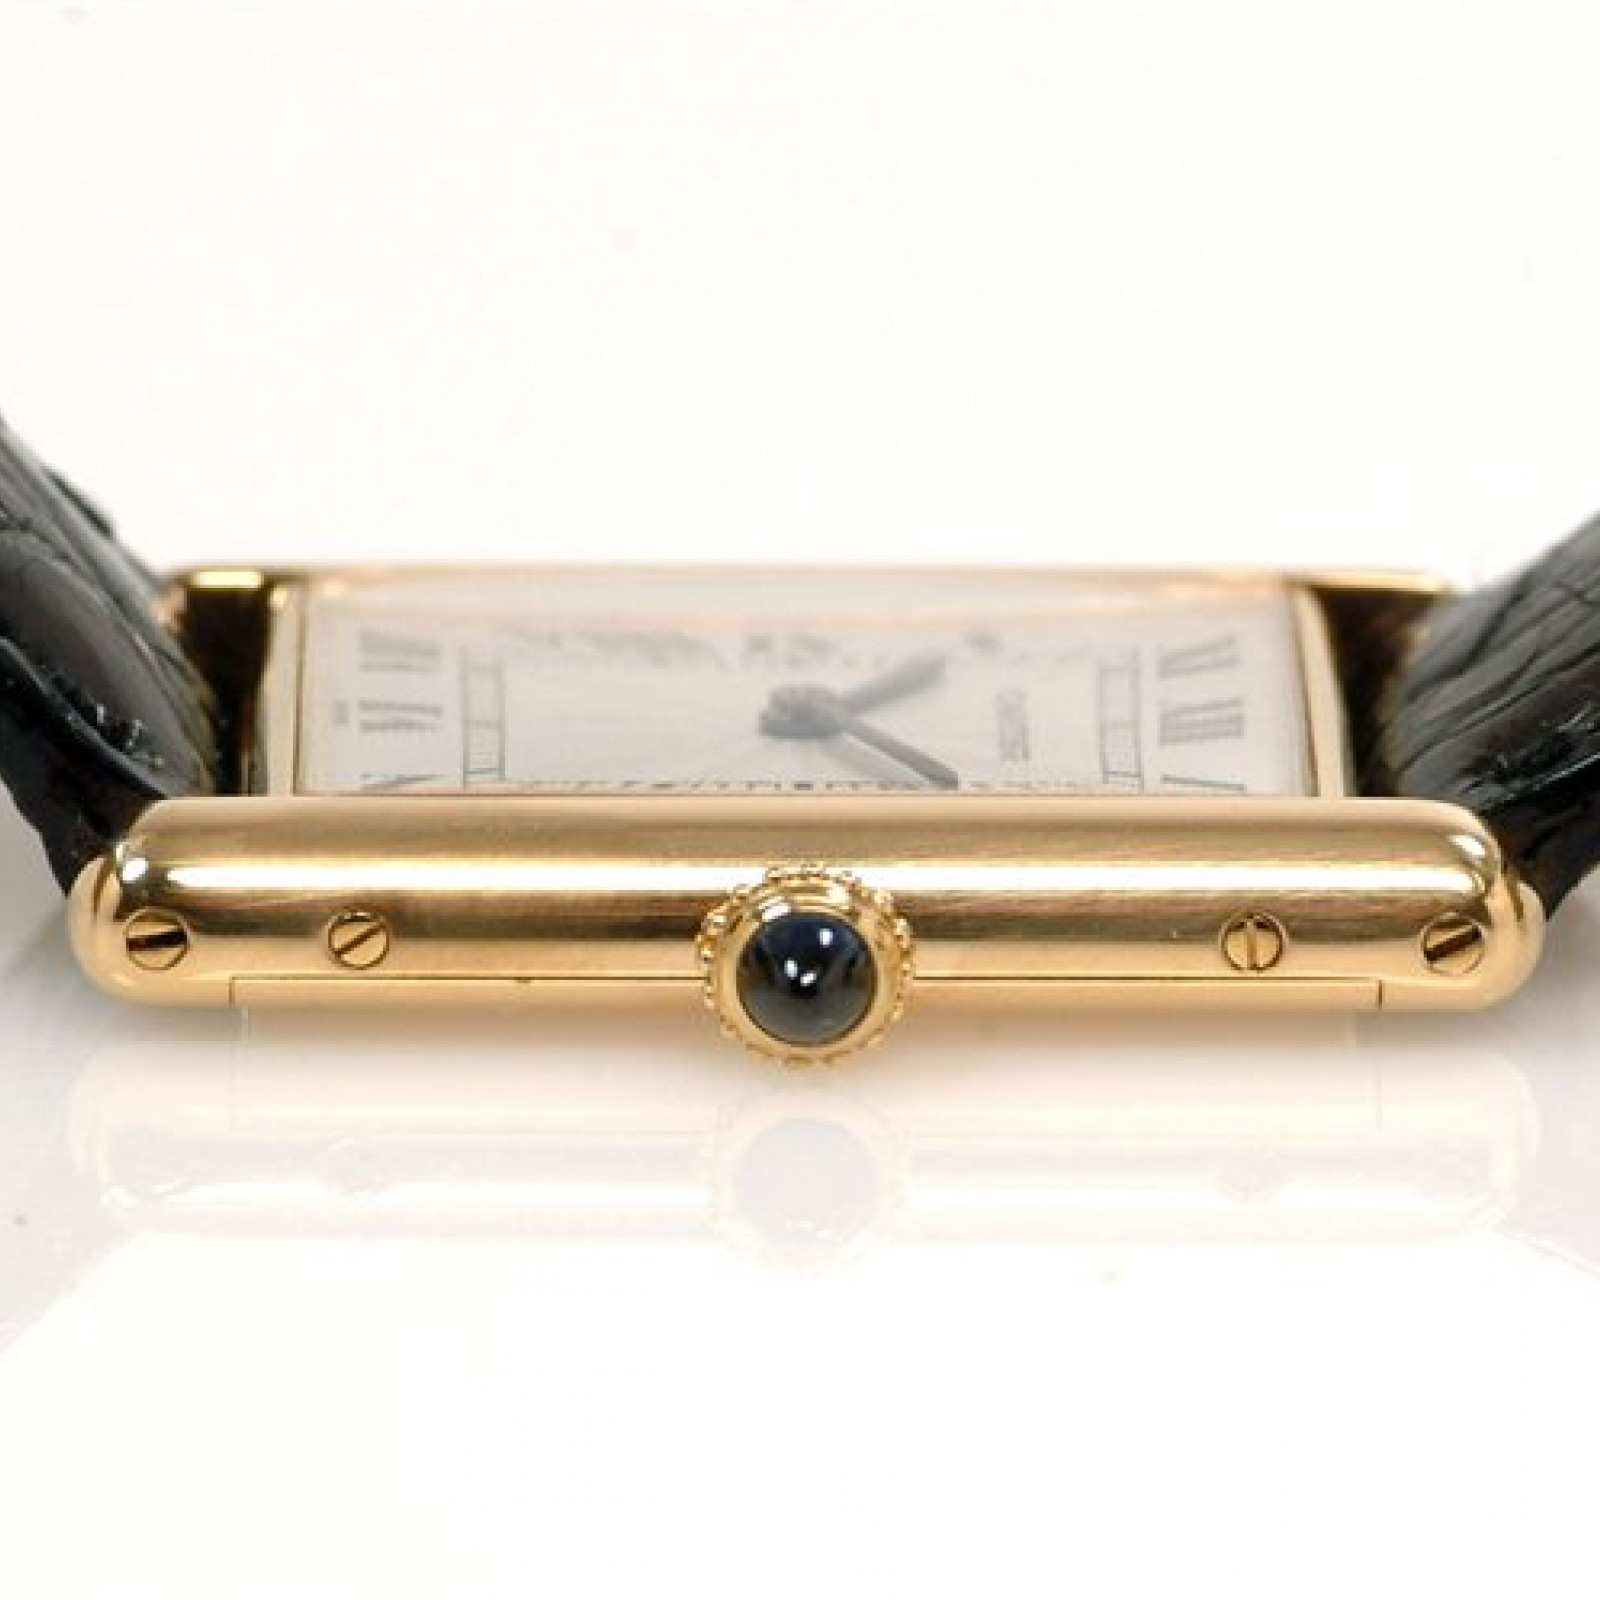 Sell Cartier Tank Classic 2322 Gold